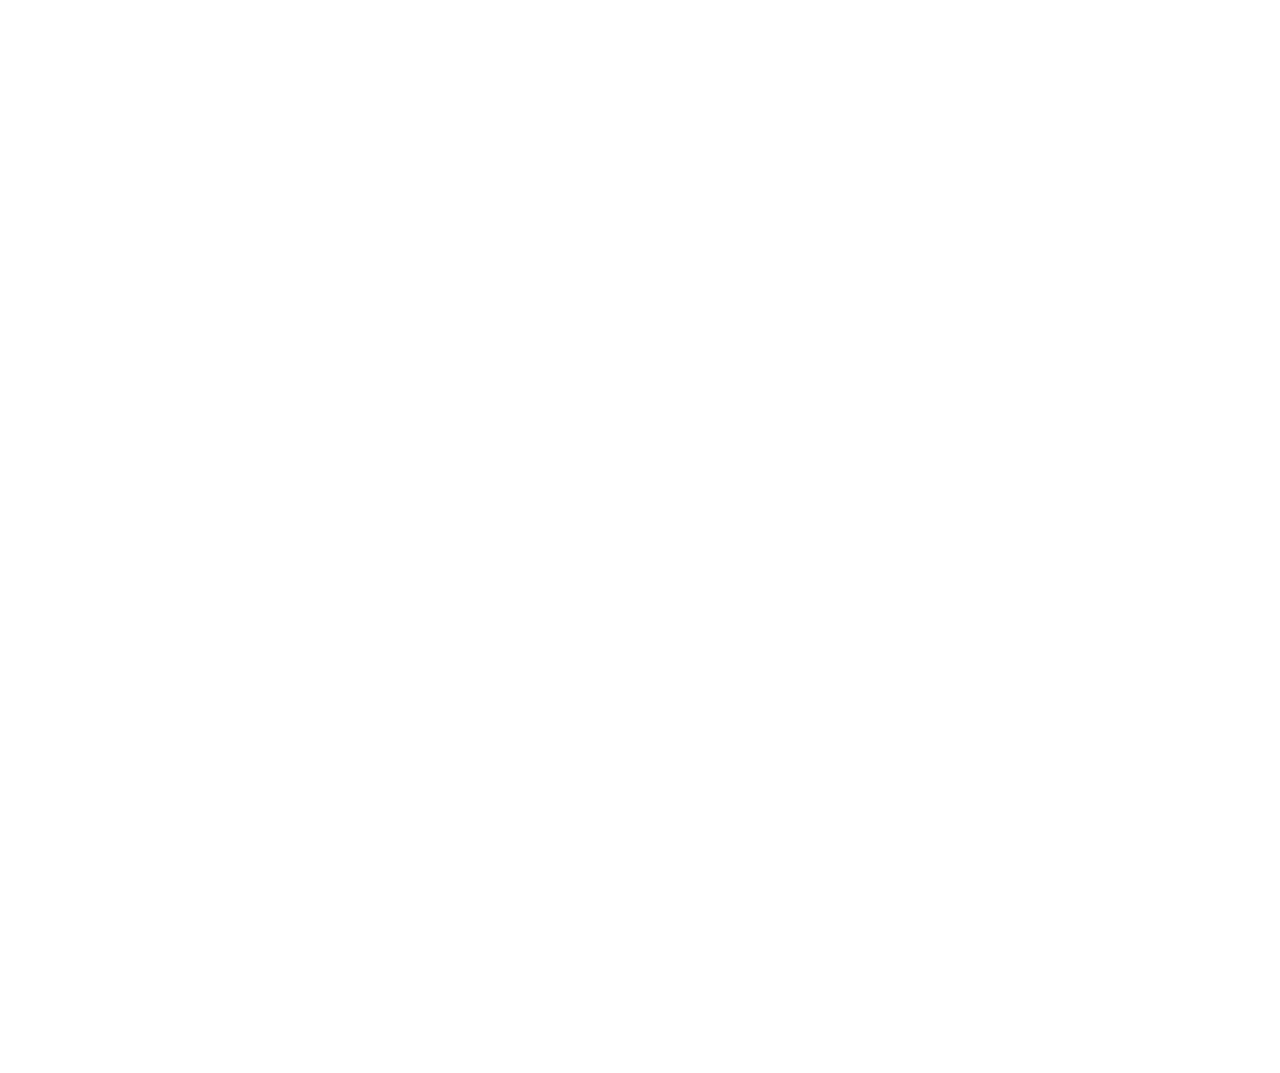 Established: Look to the East | An Online Experience | Premiering January 2 at 9AM